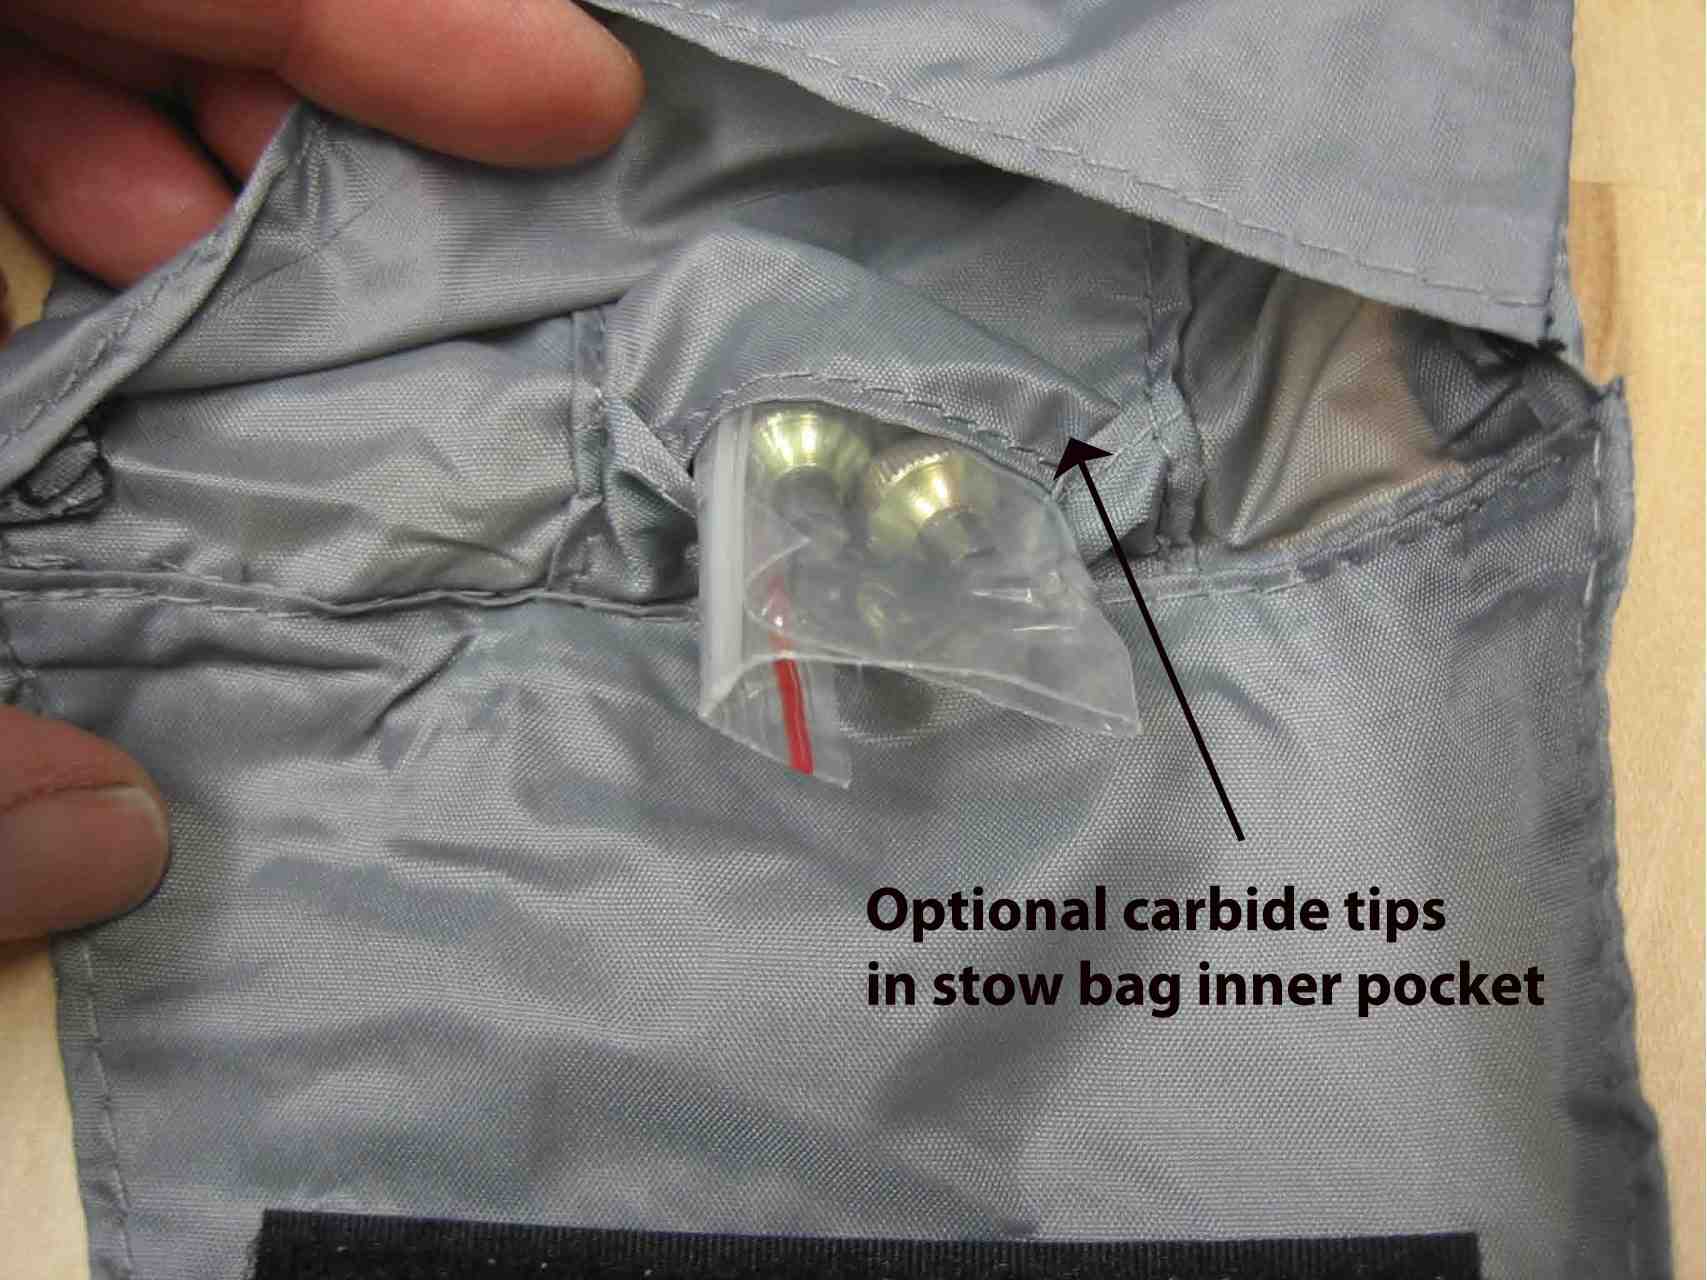 Optional carbide tips in stow bag pocket